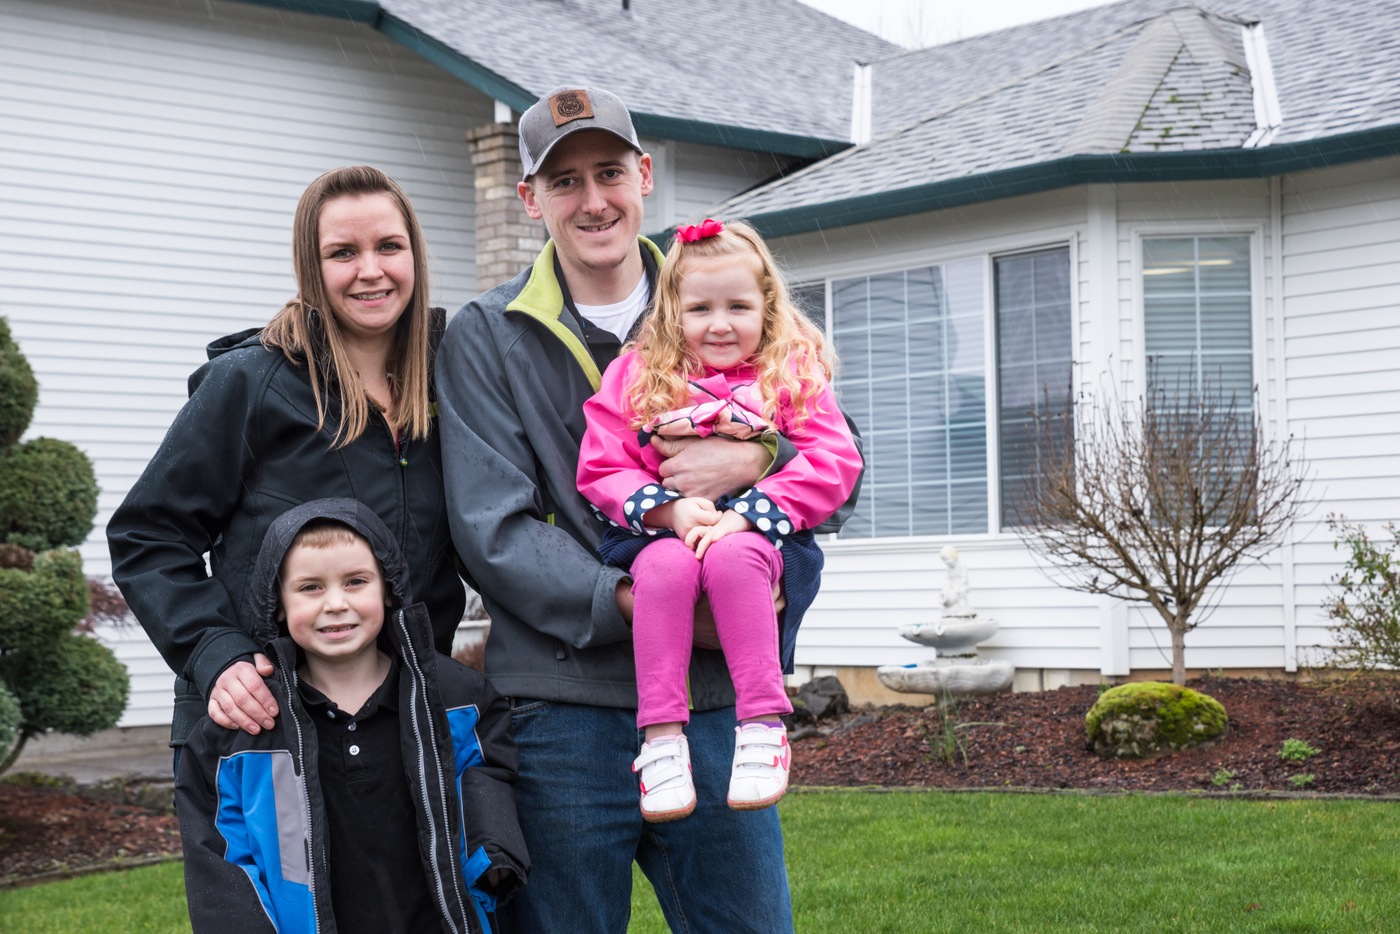 Aaron Cole and his family stand in front of the Oregon home that was nearly taken from them by online fraudsters and money mules. Photo credit: Melissa Toledo for WFG.